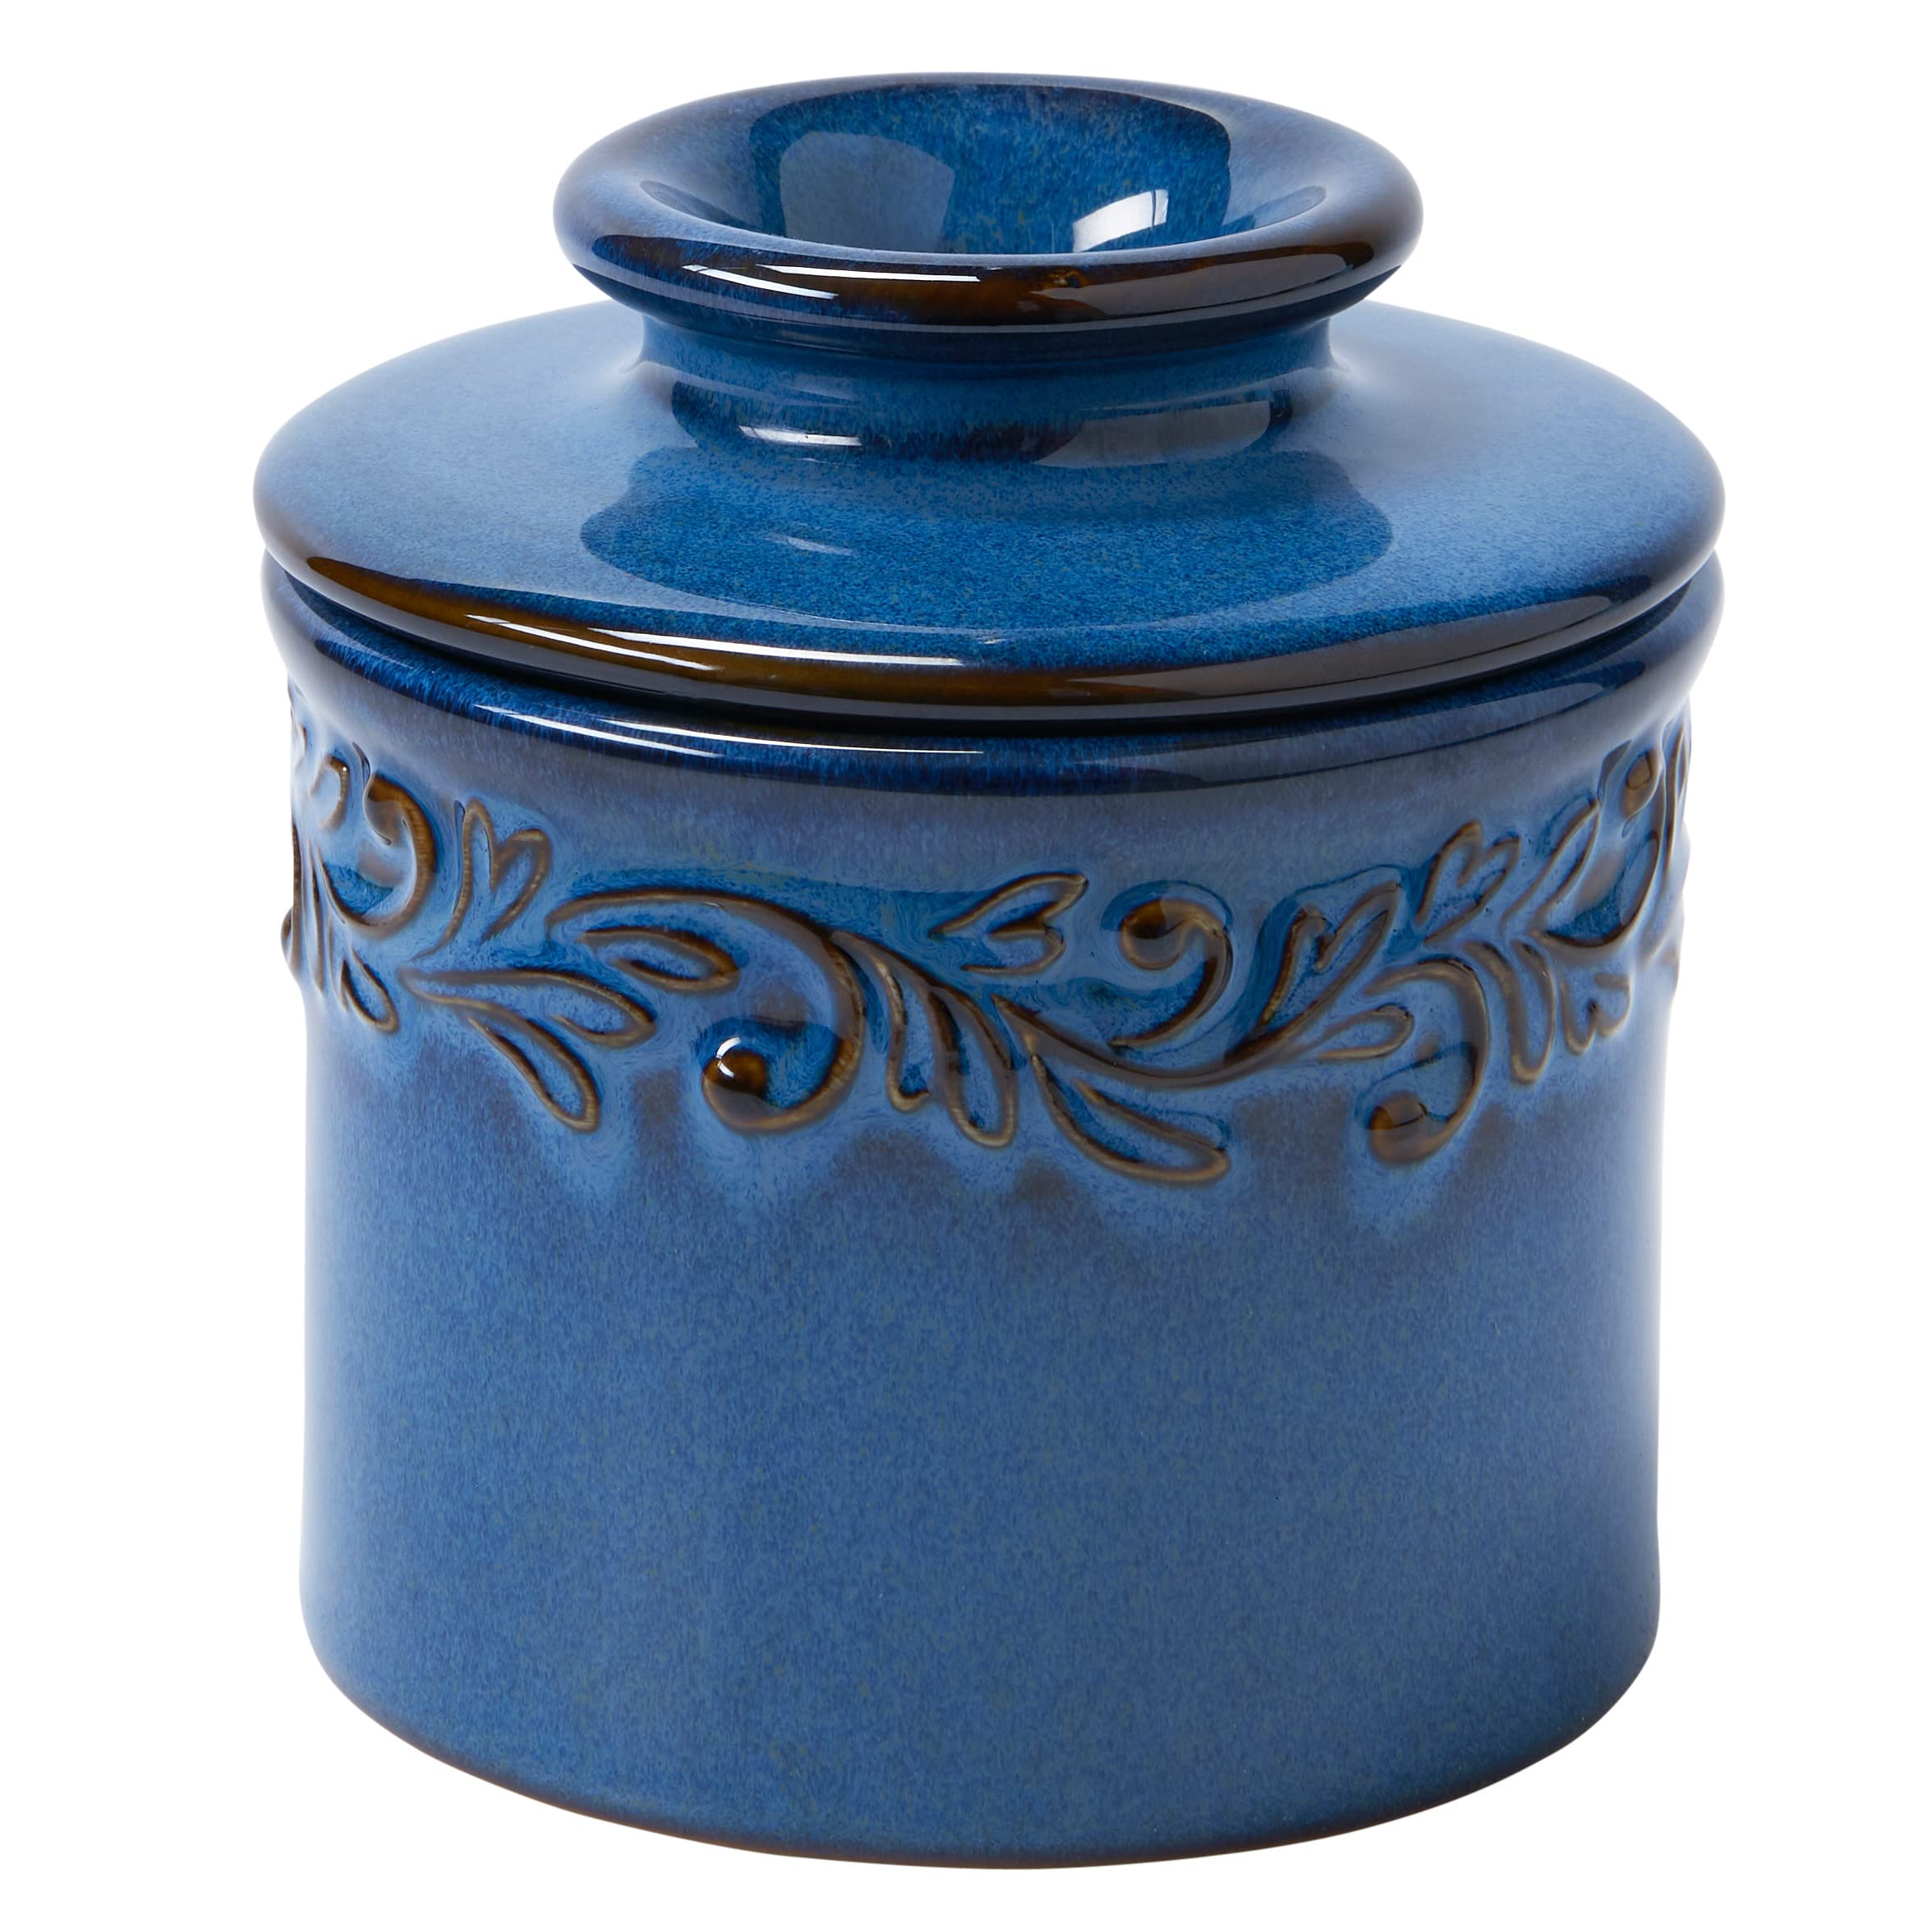 Butter Bell - The Original Butter Bell crock by L Tremain, a Countertop French Ceramic Butter Dish Keeper for Spreadable Butter, Antique Collection, Denim Blue - Reactive Glaze Pottery